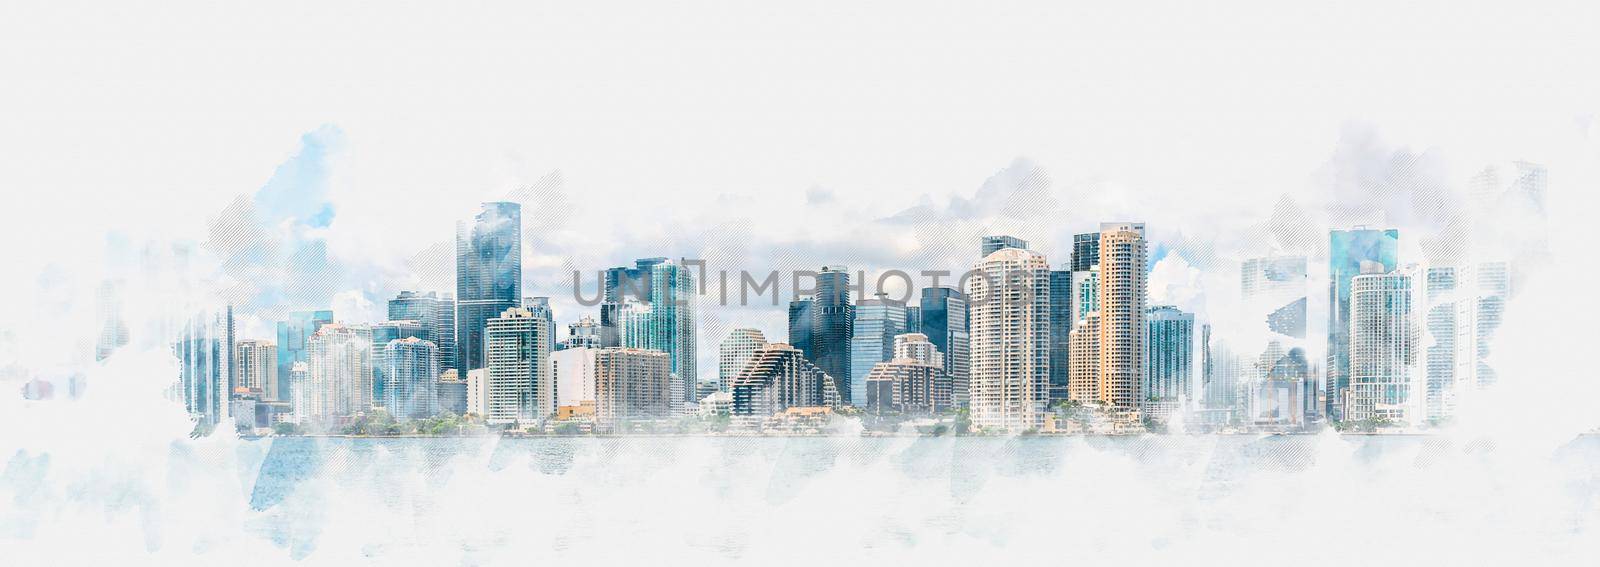 Watercolor digital illustration of Miami Downtown skyline isolated on white background by Mariakray